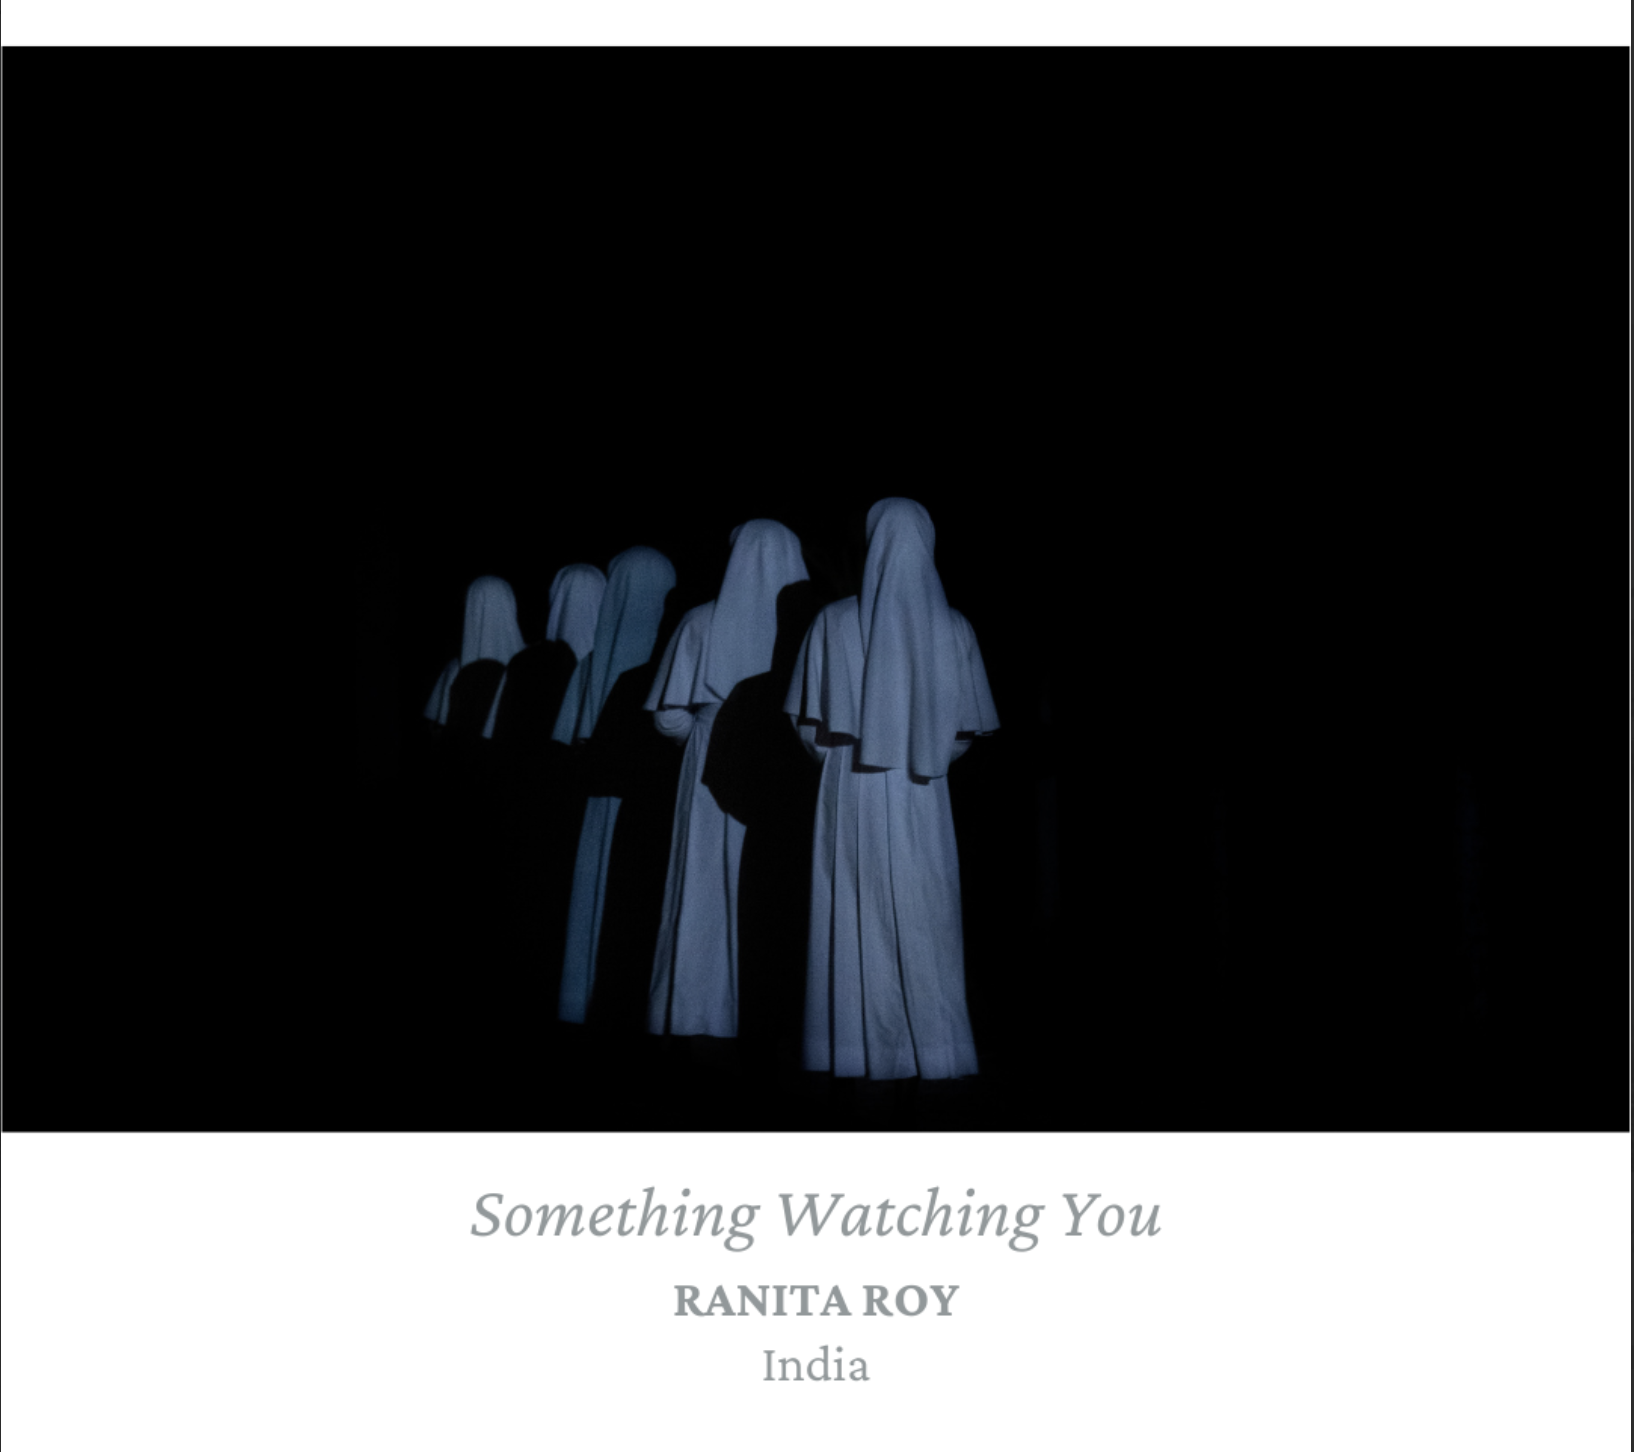 "Something watching you” open air projection at Angkor Photo Festival